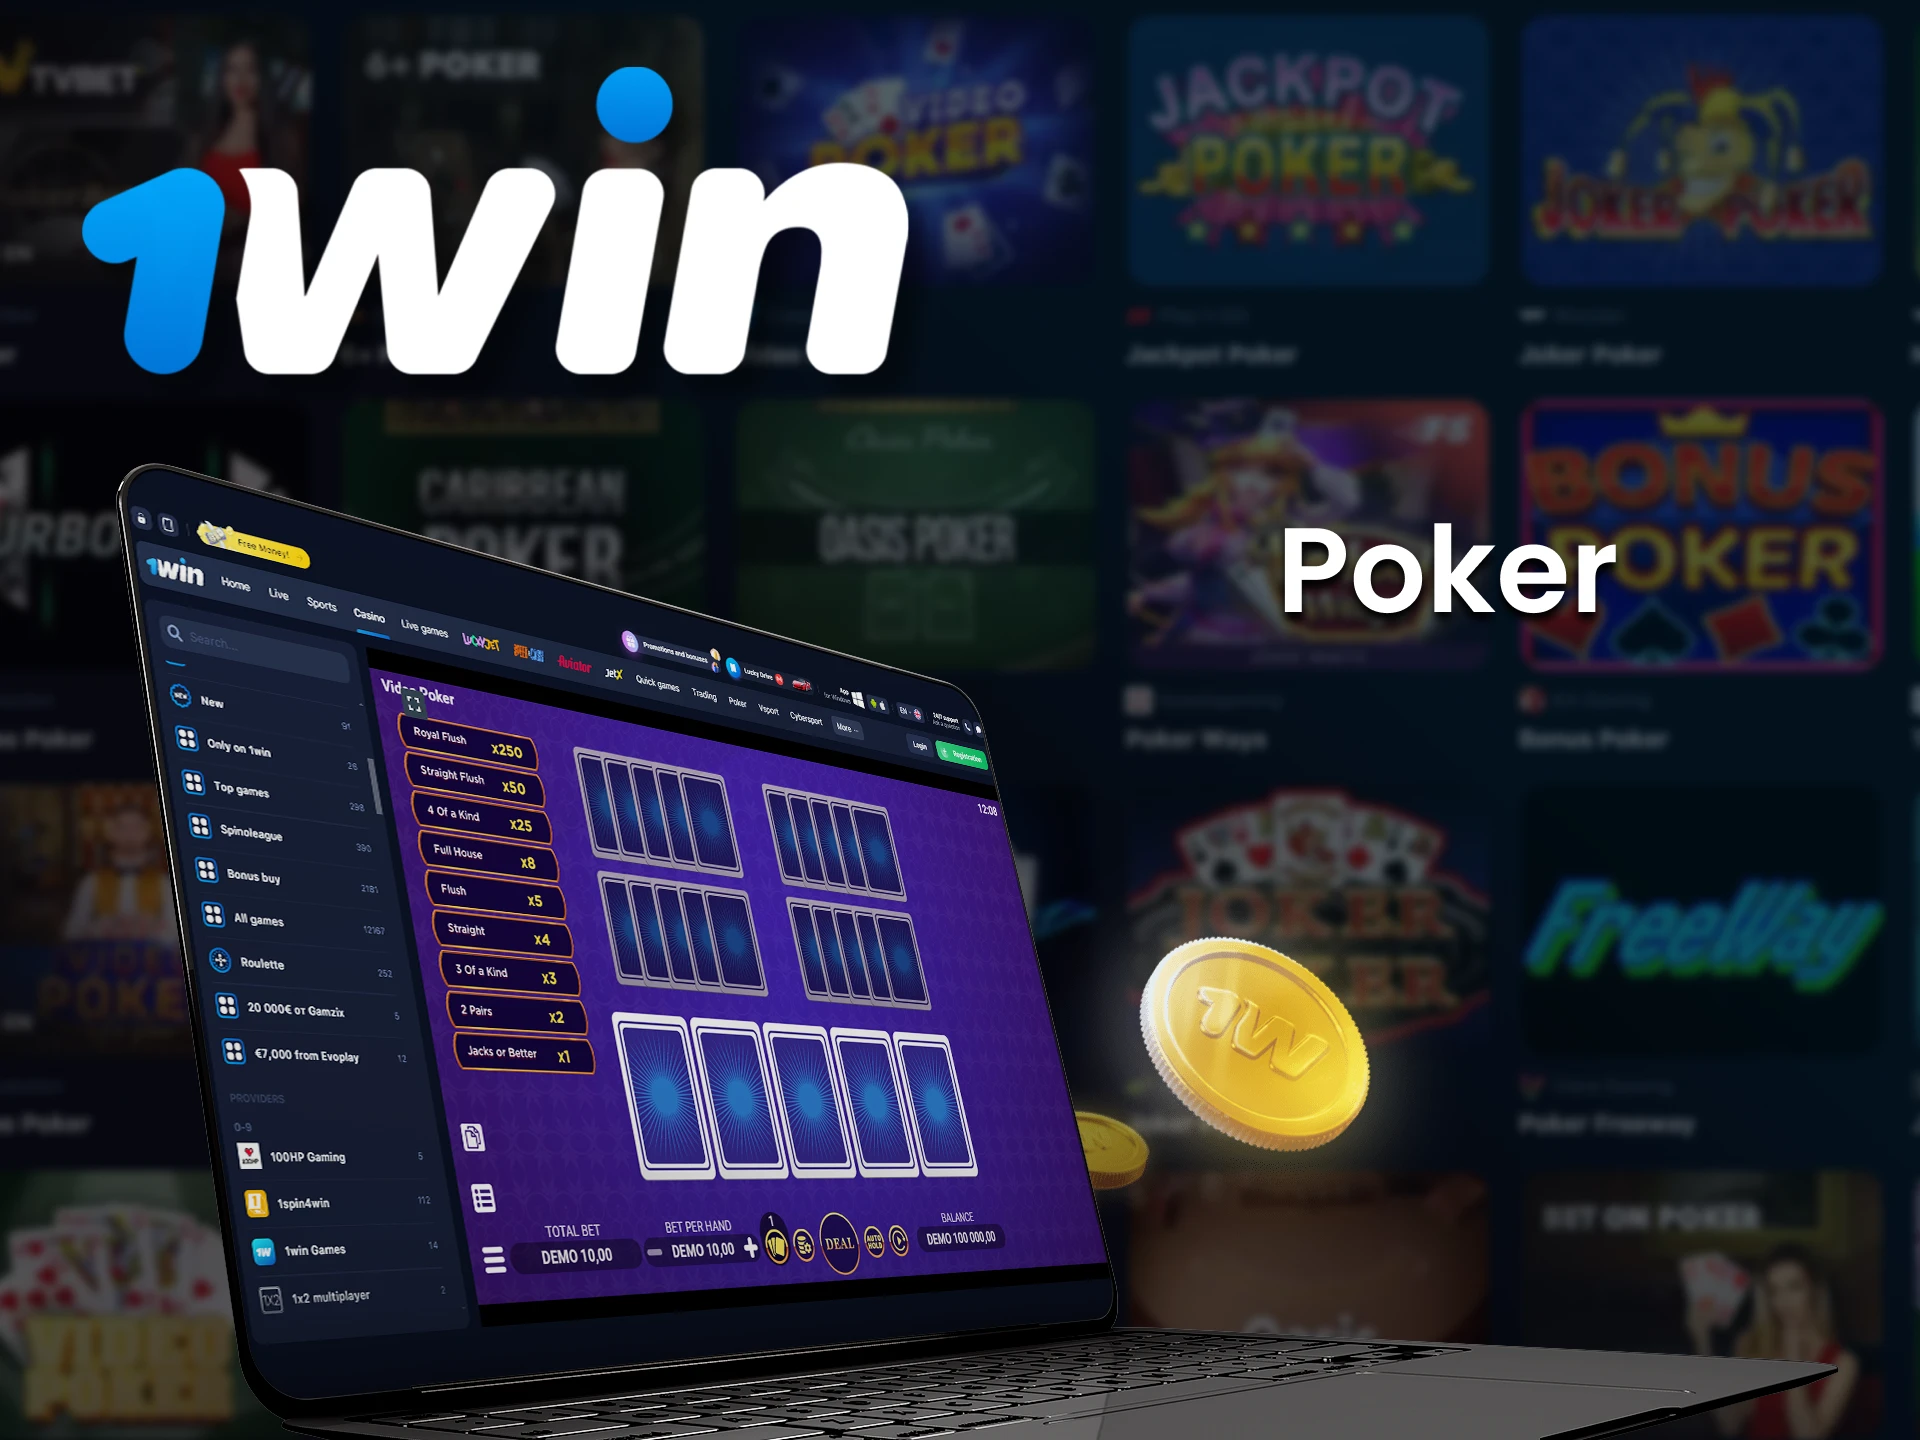 For casino games at 1win, choose Poker.